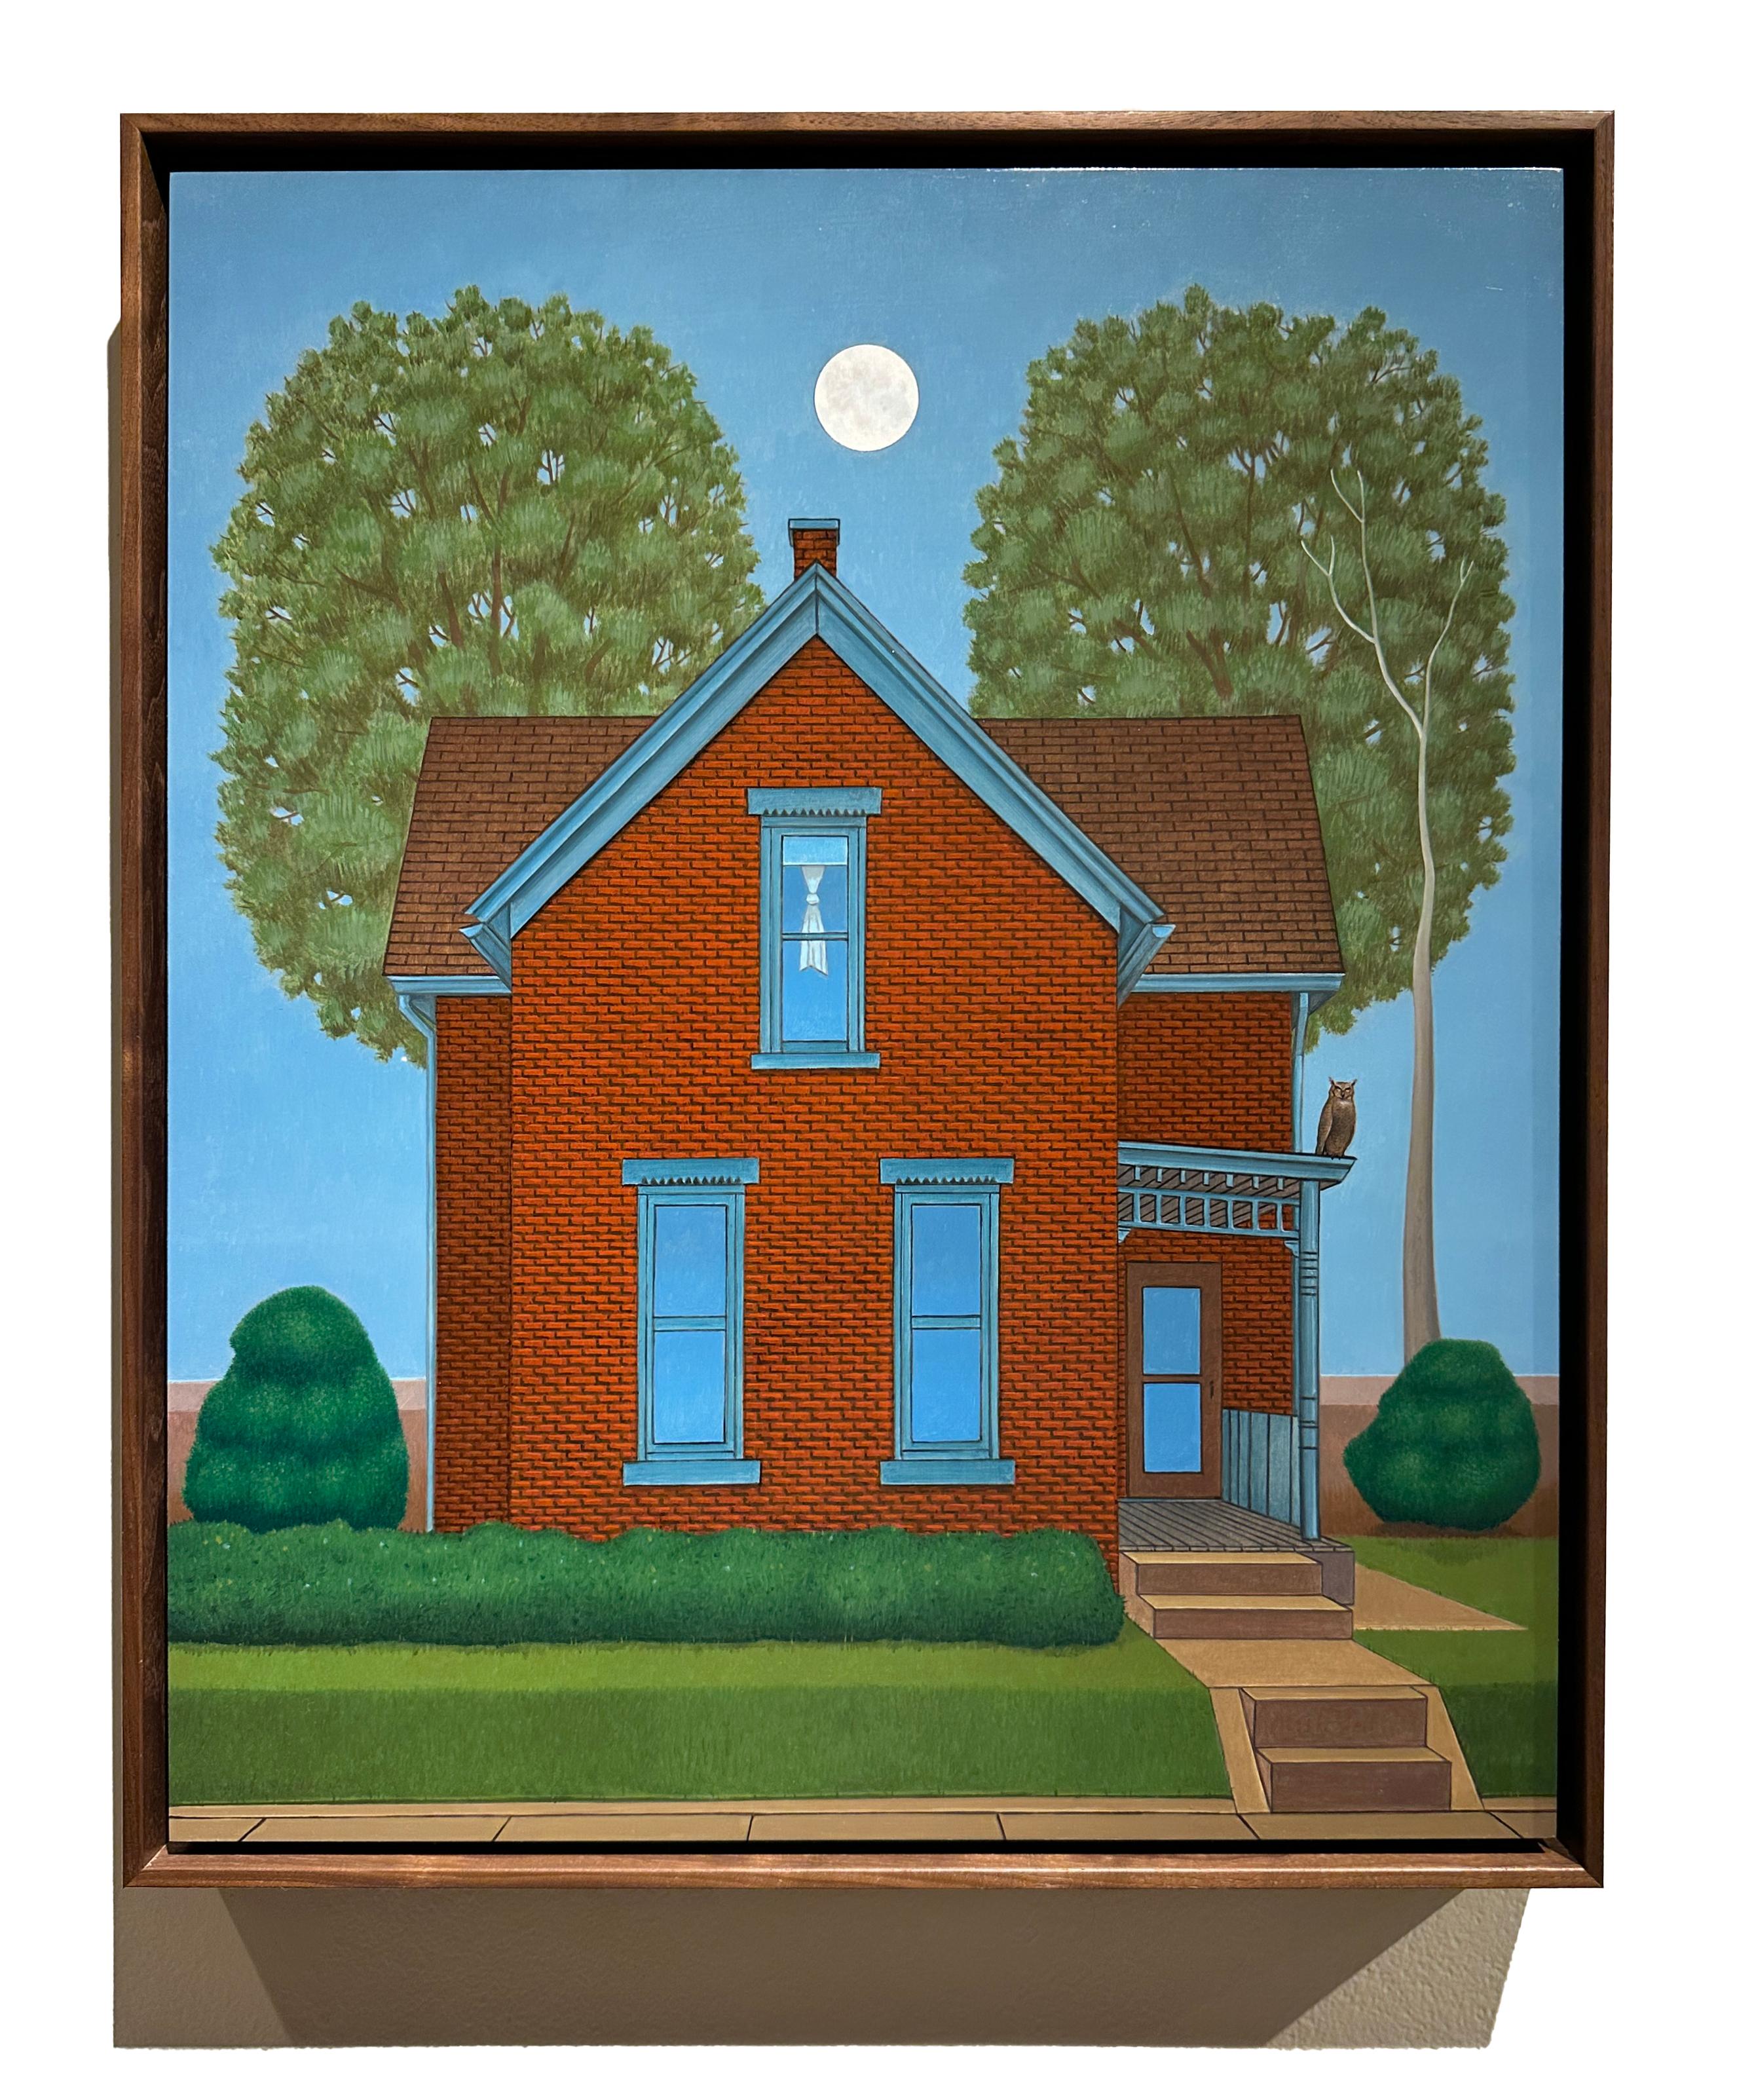 Summer House (For G.A.) - Quaint Cottage Illuminated by Moon Light, Framed - Painting by John Hrehov